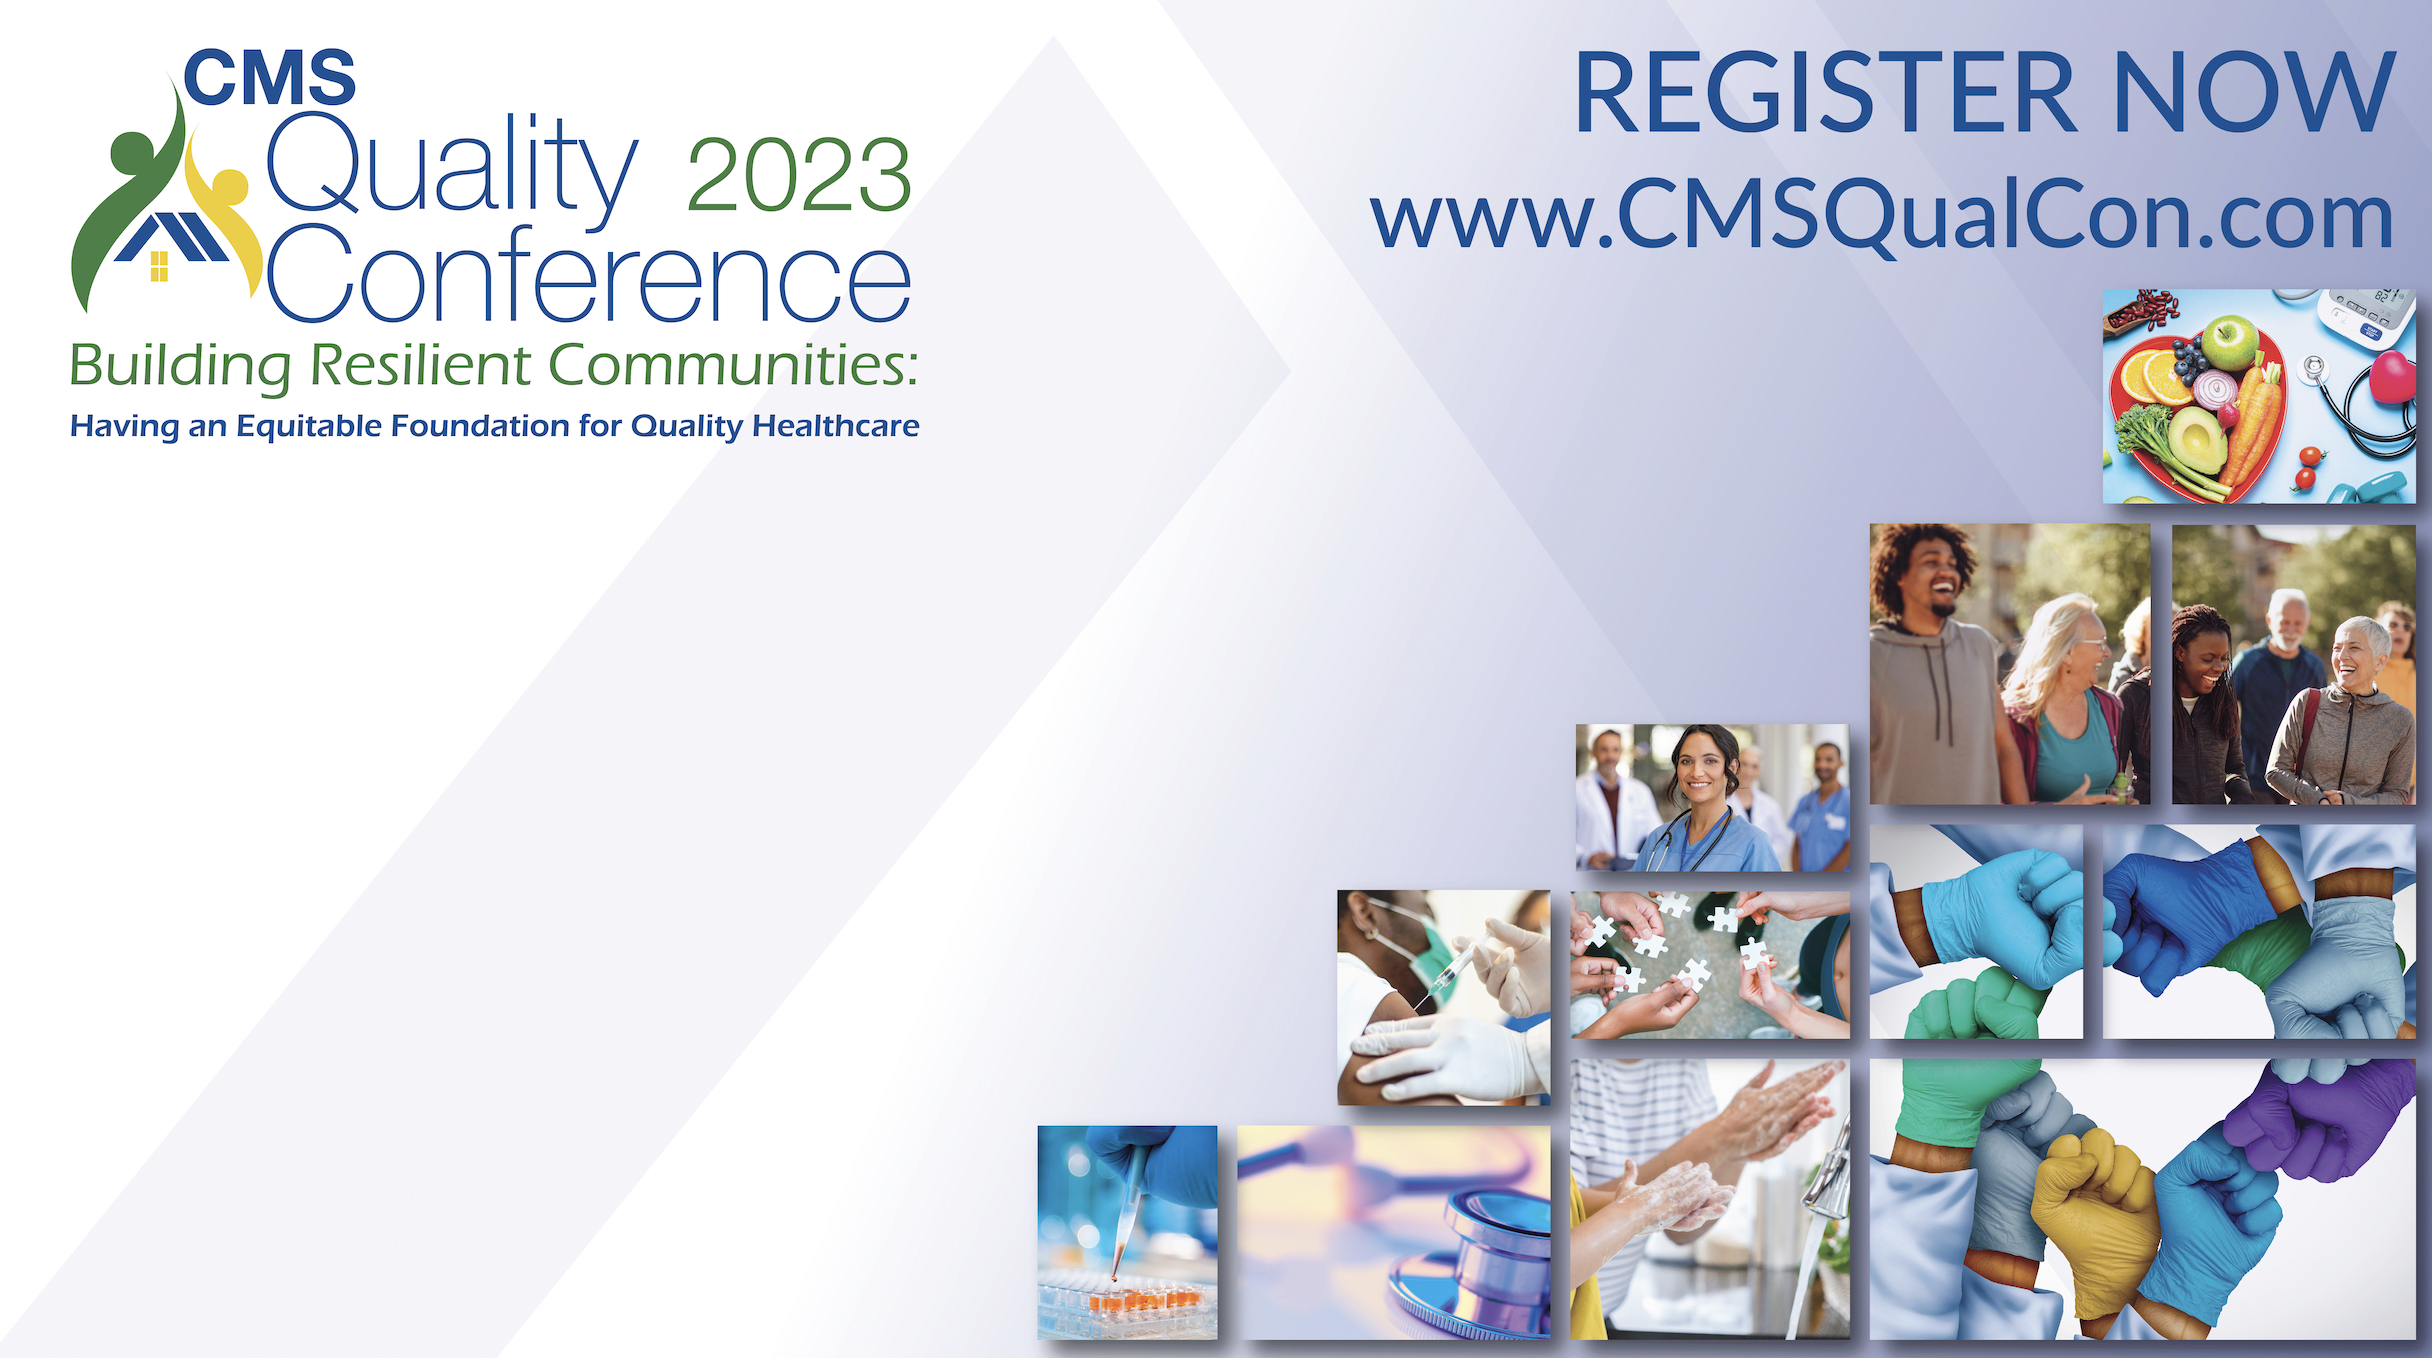 Graphic depicting the 2023 CMS Quality Conference logo with the words REGISTER NOW and a URL in the top right corner.